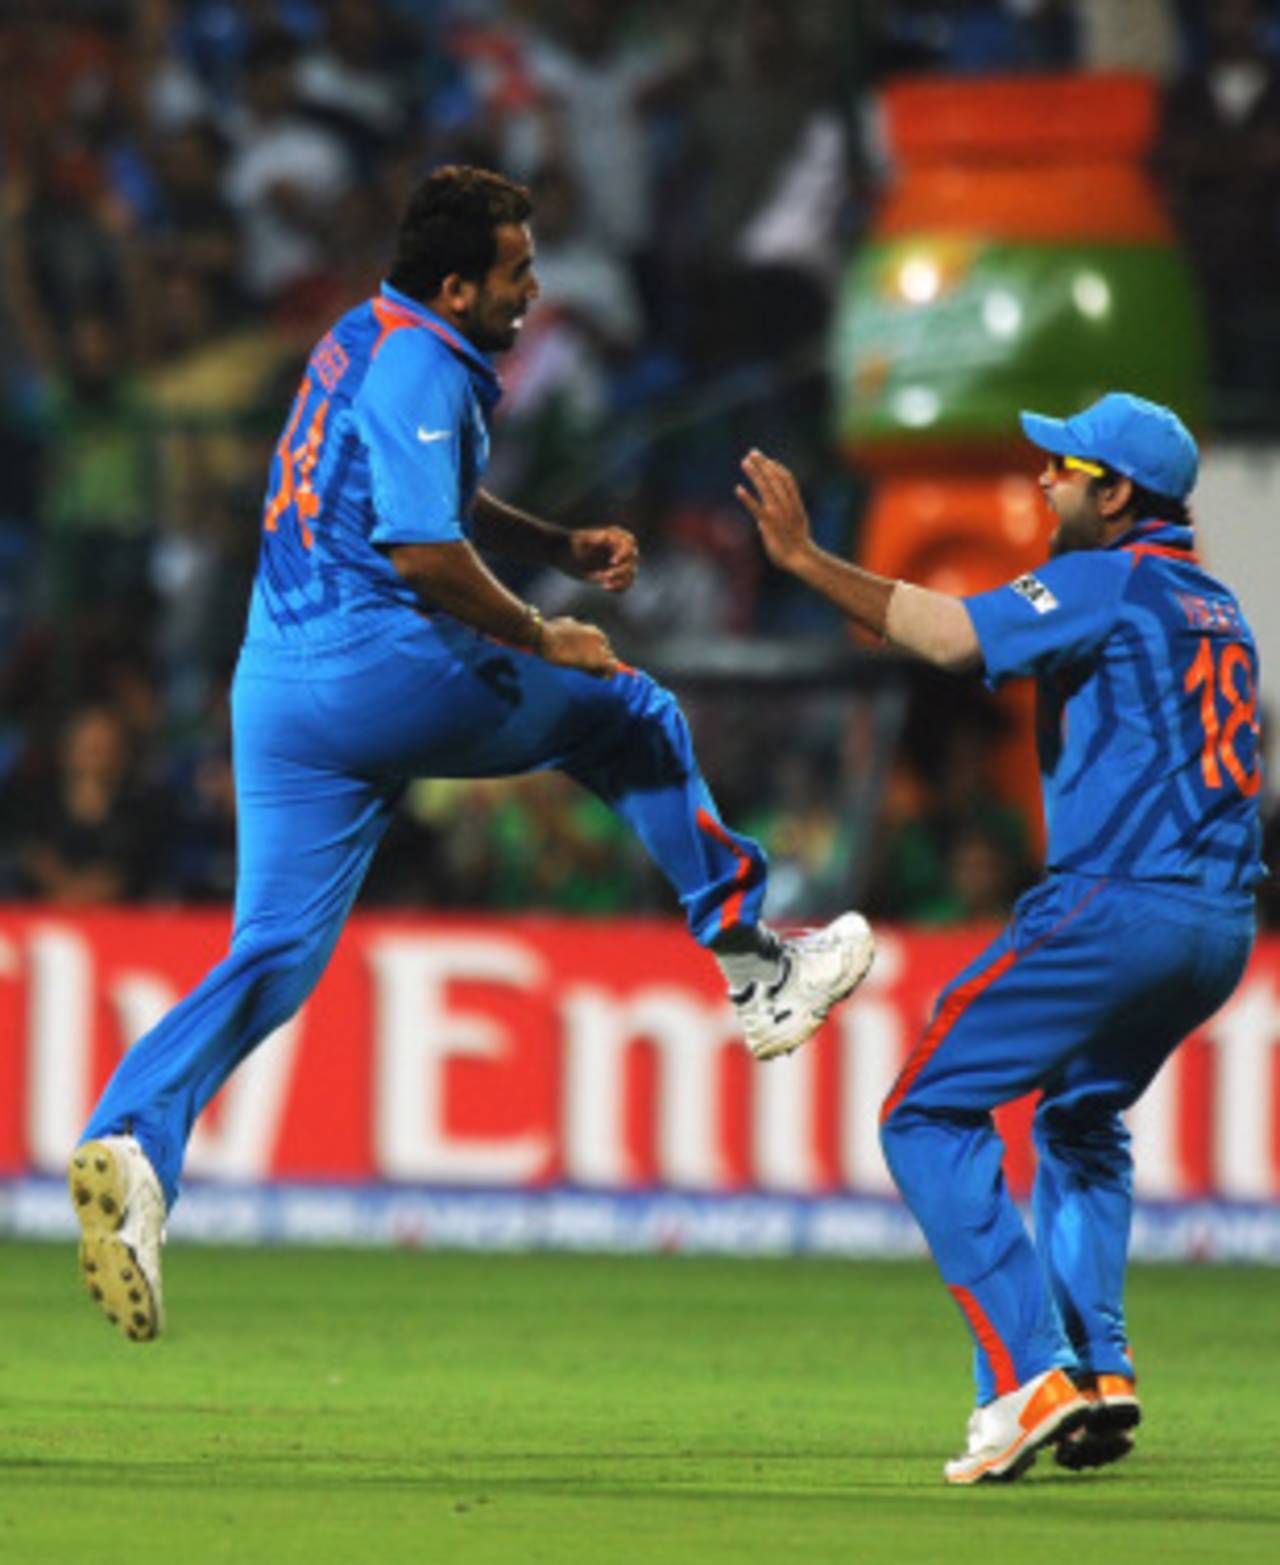 Zaheer Khan leaps for joy after dismissing Andrew Strauss, India v England, World Cup, Group B, Bangalore, February 27, 2011